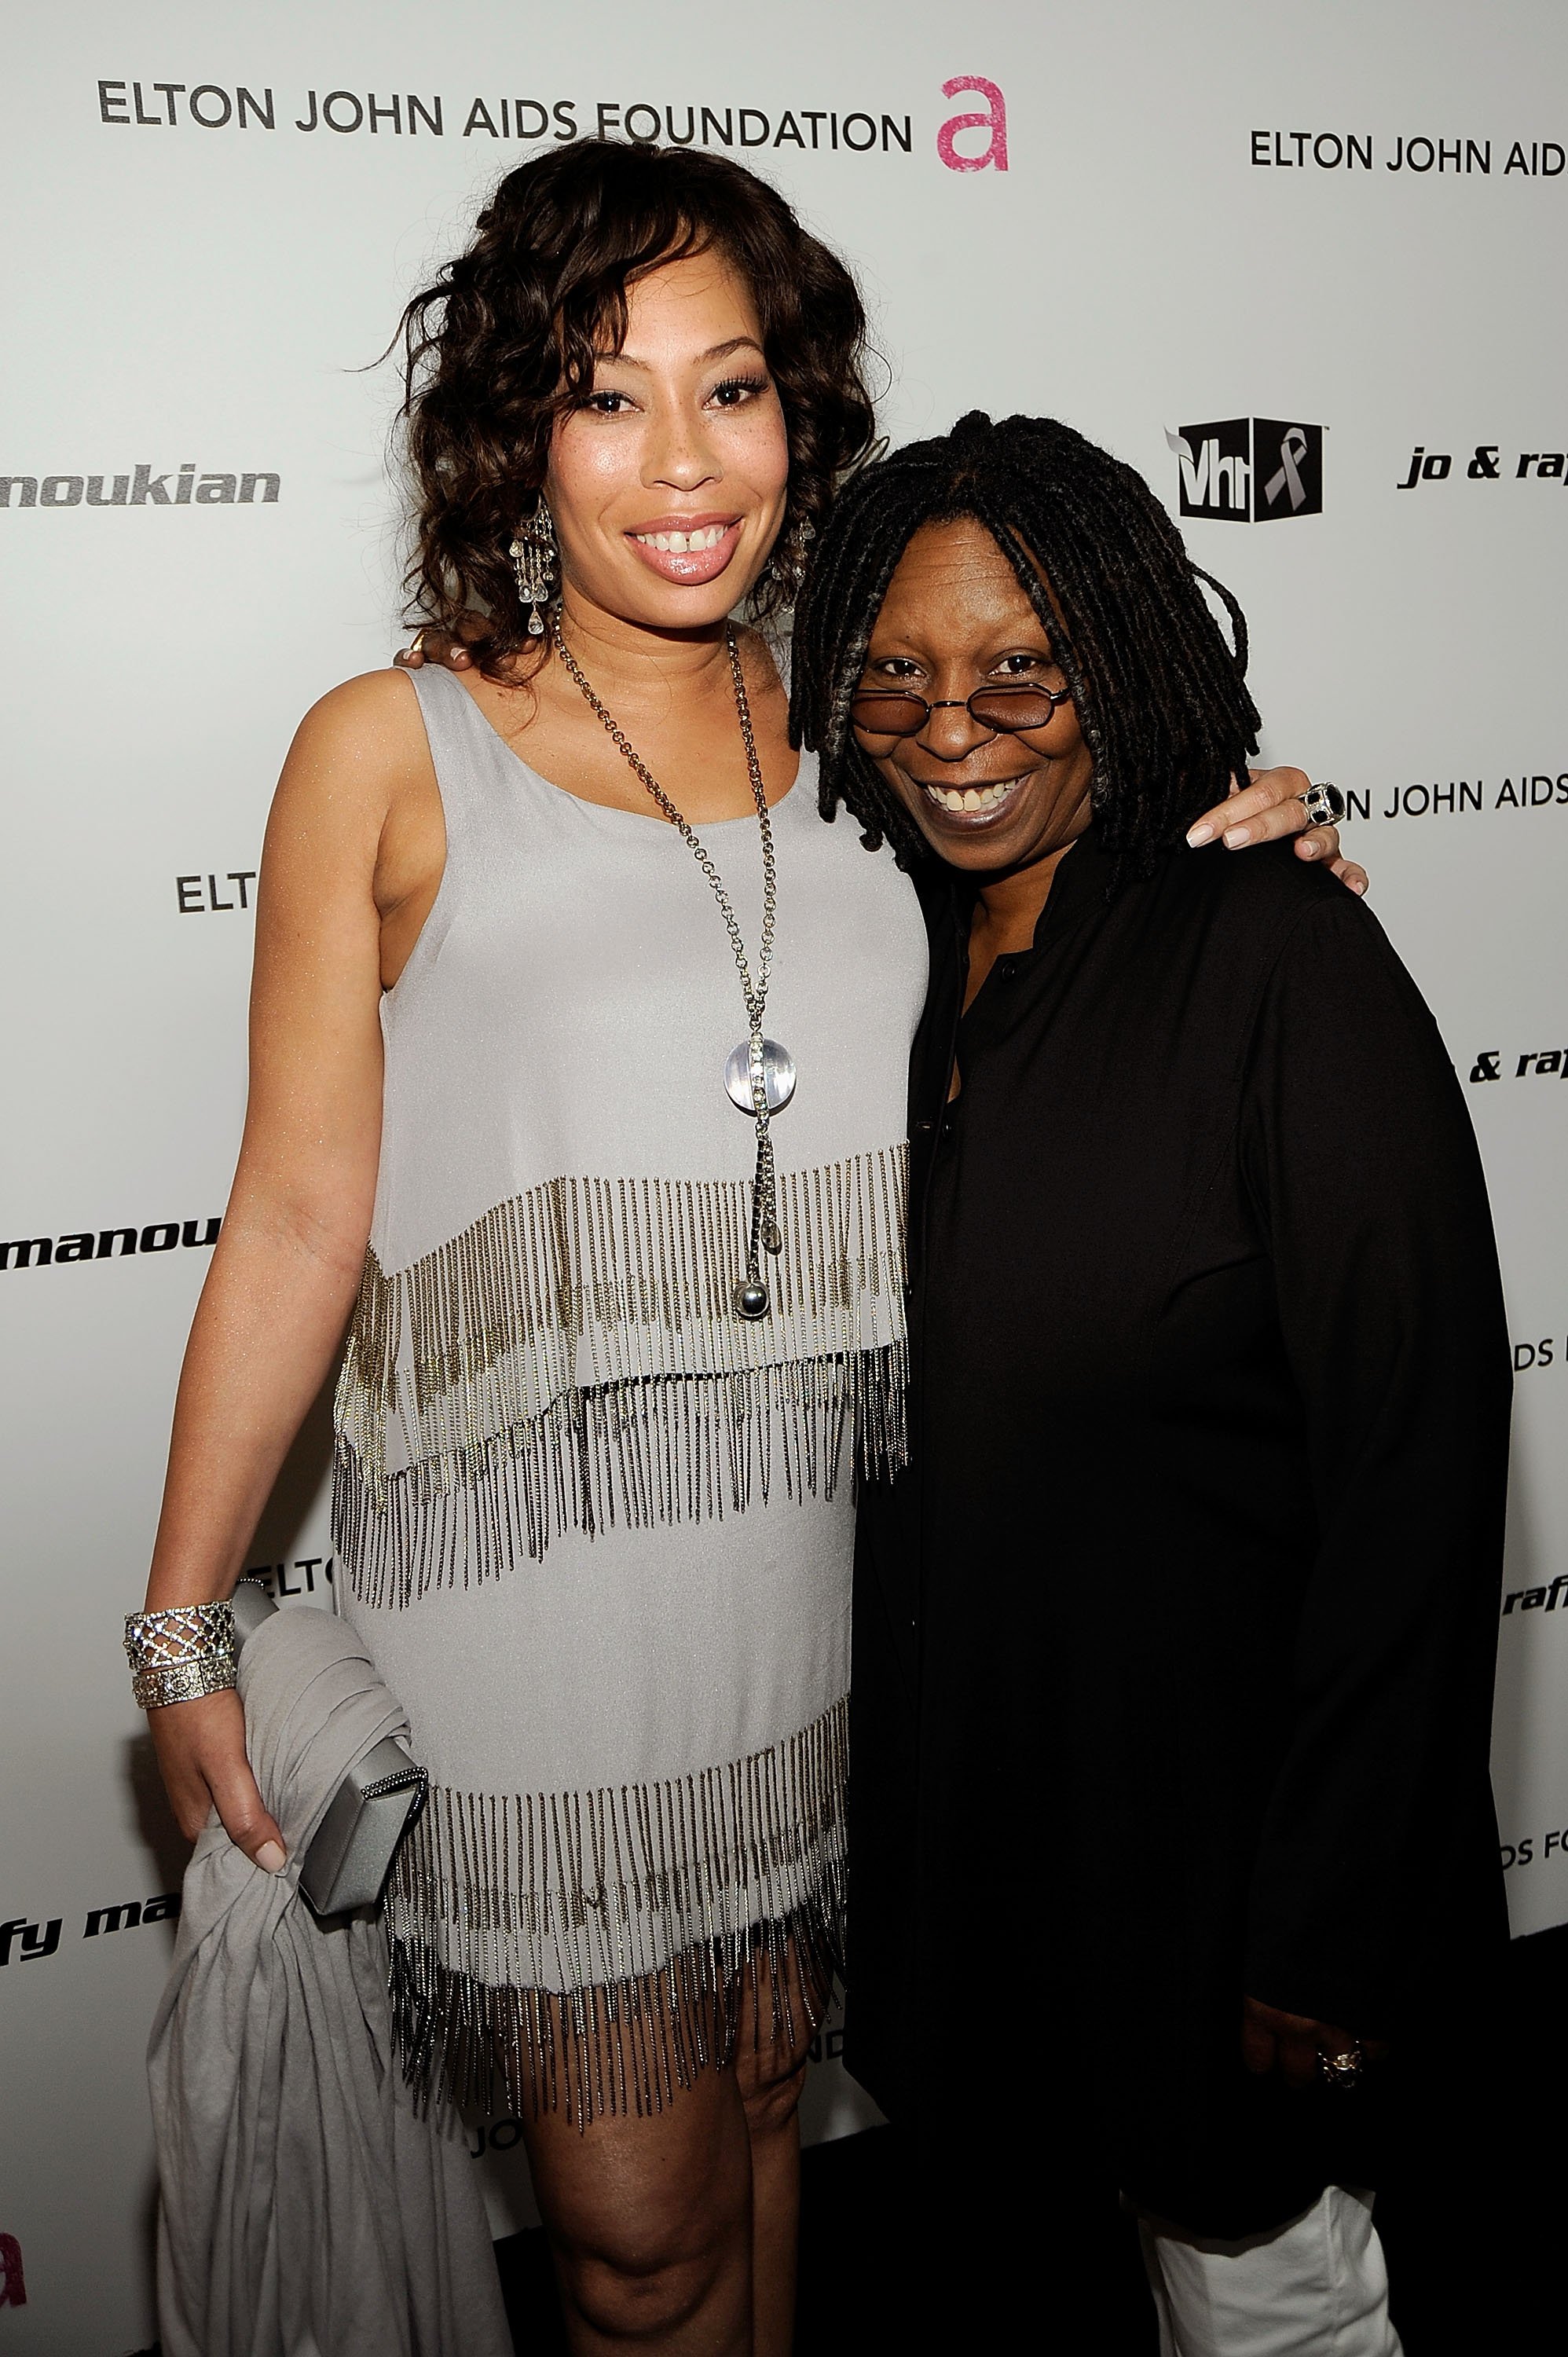 Whoopi Goldberg & Alex Martin at the 17th Annual Elton John AIDS Foundation Oscar Party in New York on Feb. 22, 2009. |Photo: Getty Images